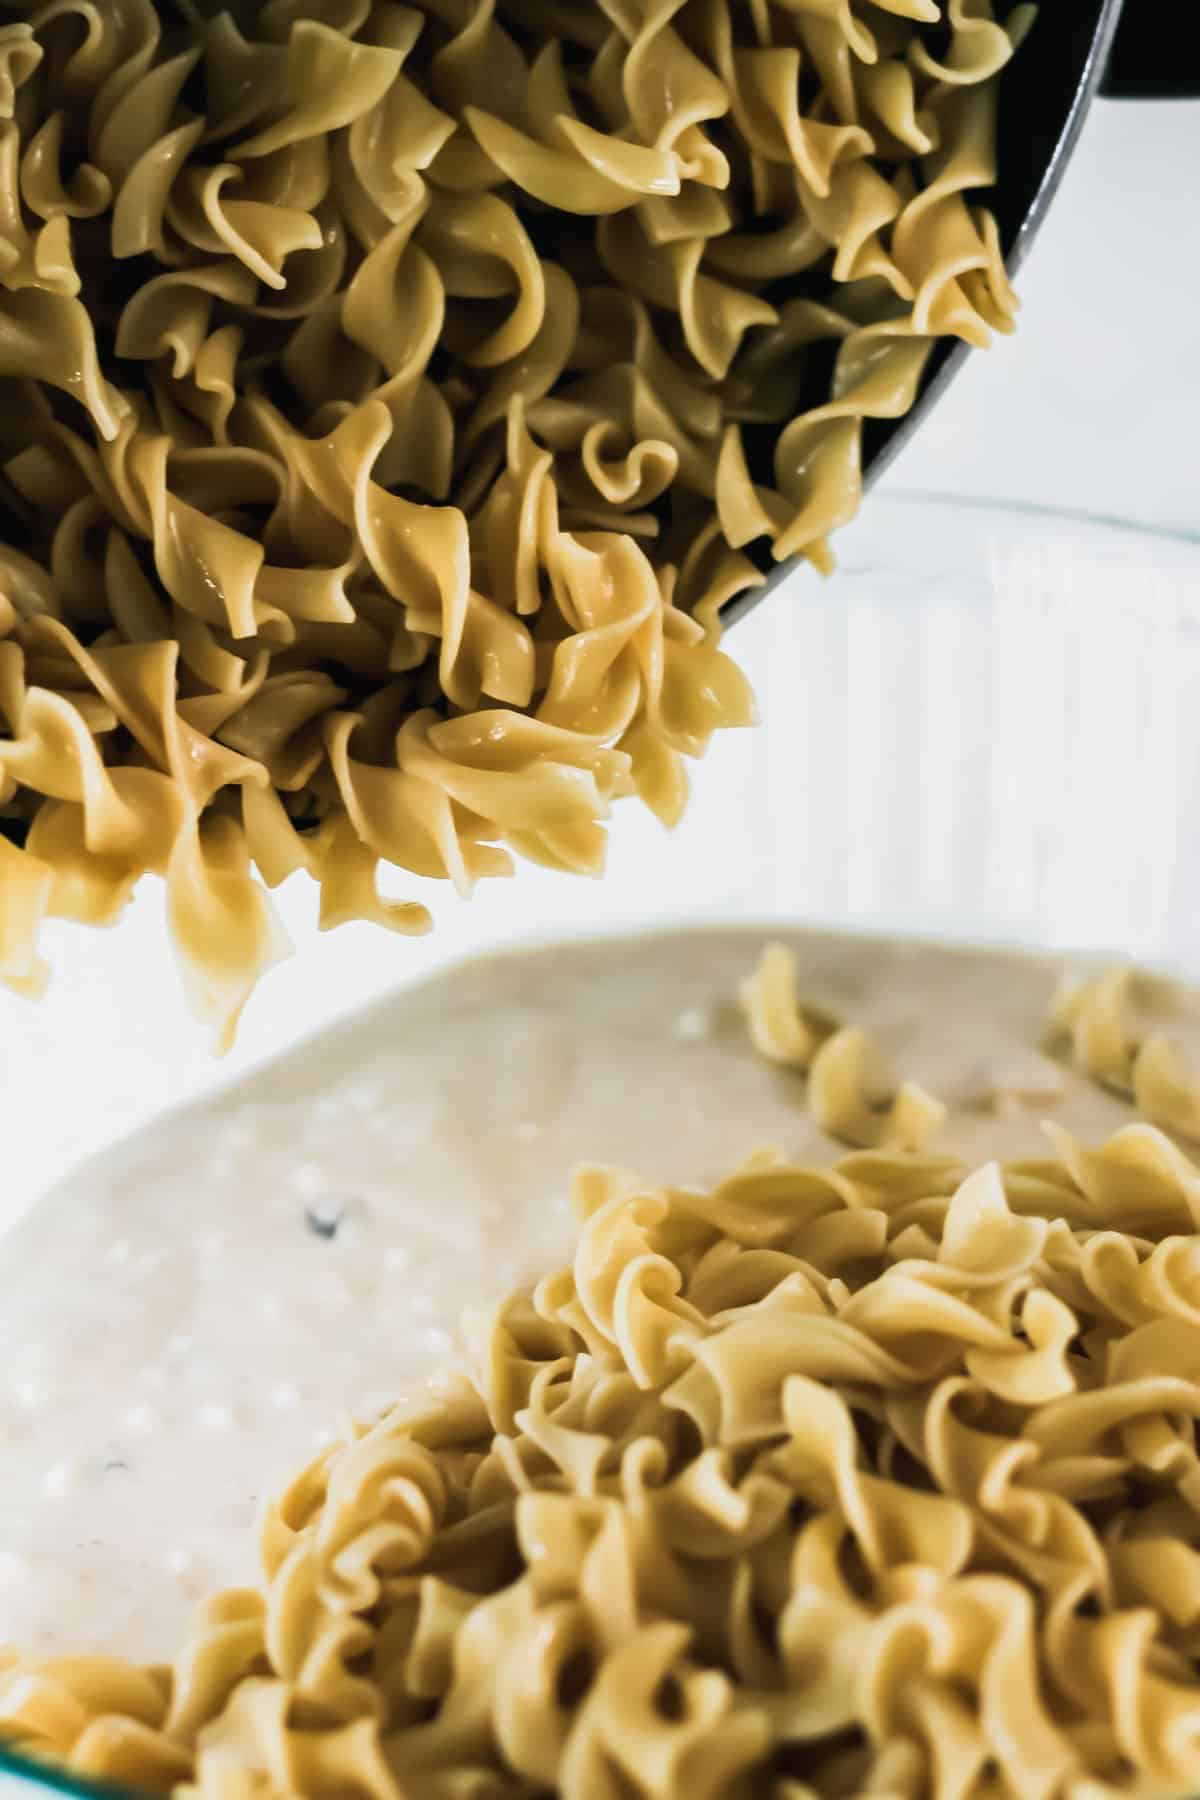 Dumping cooked egg noodles into the liquid mixture.